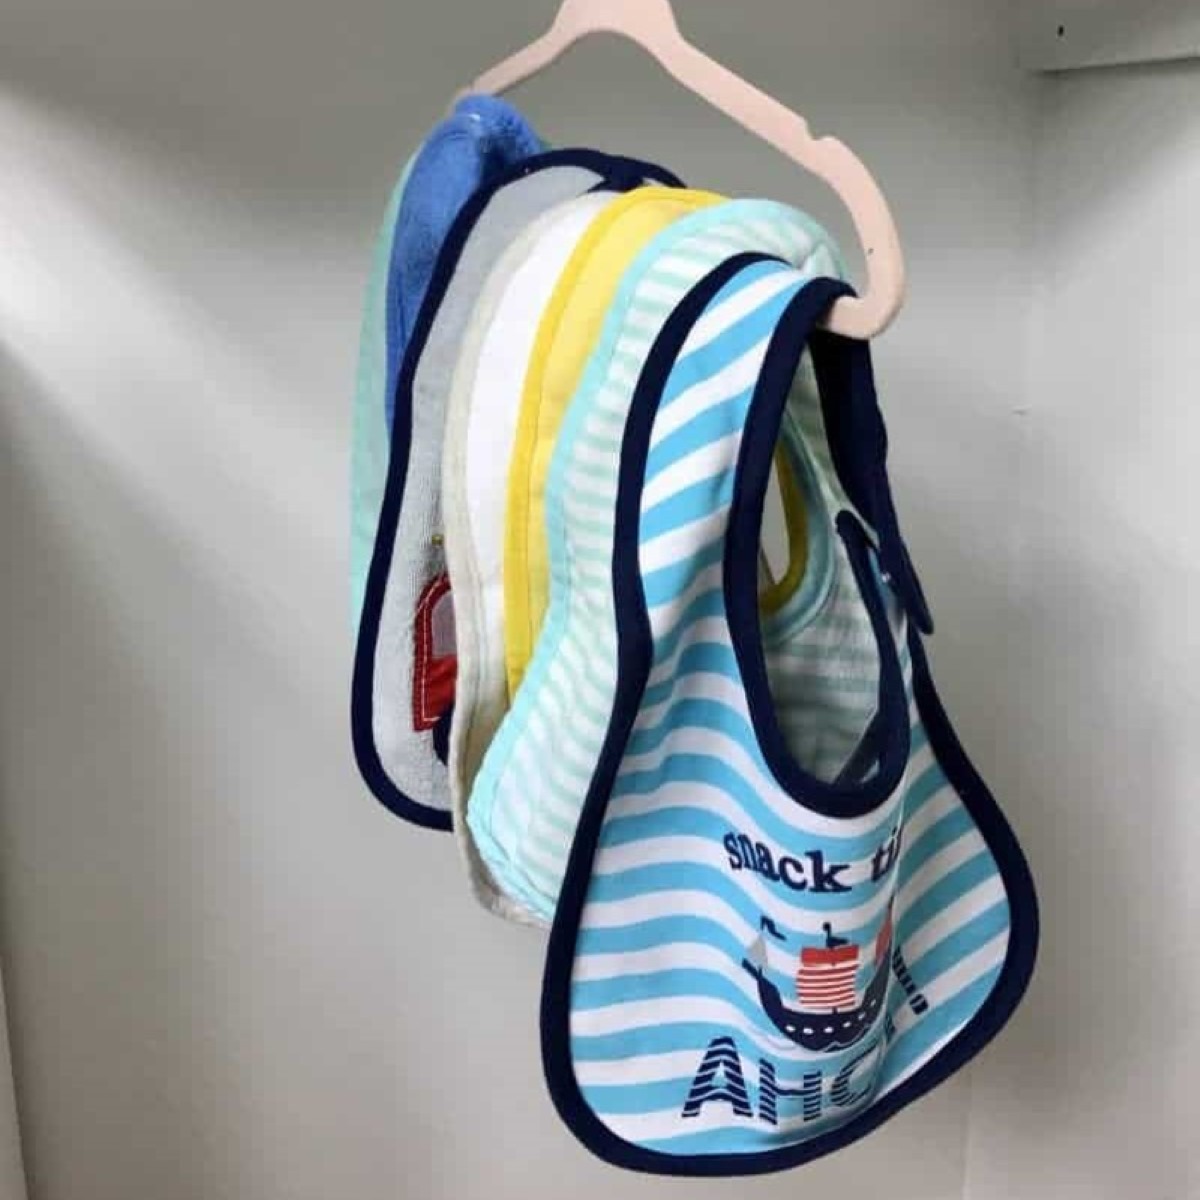 How To Store Bibs